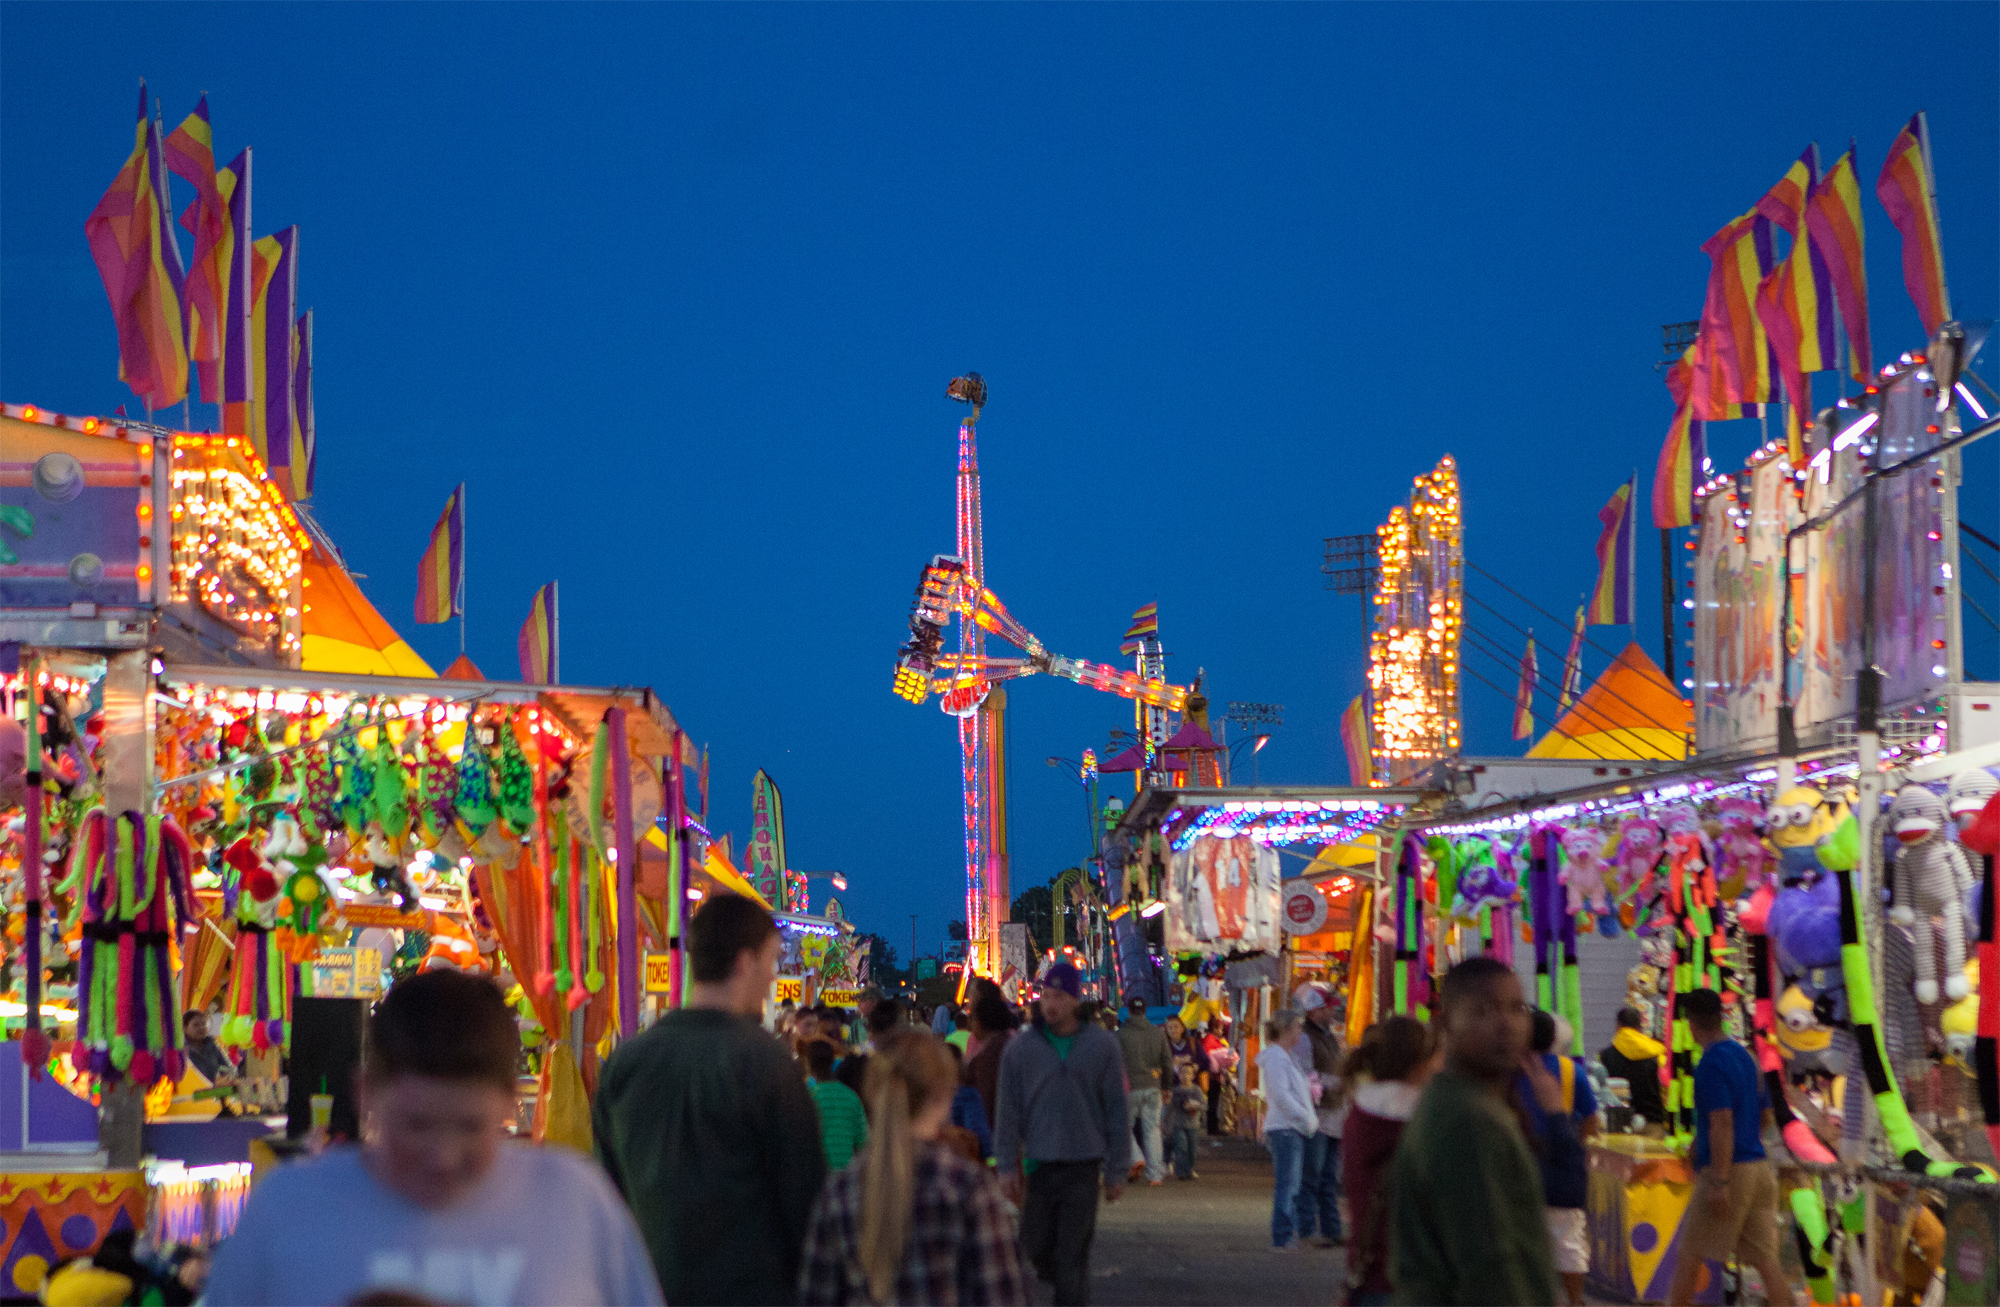 State Fair of Louisiana Announces Details of 112th Annual Event